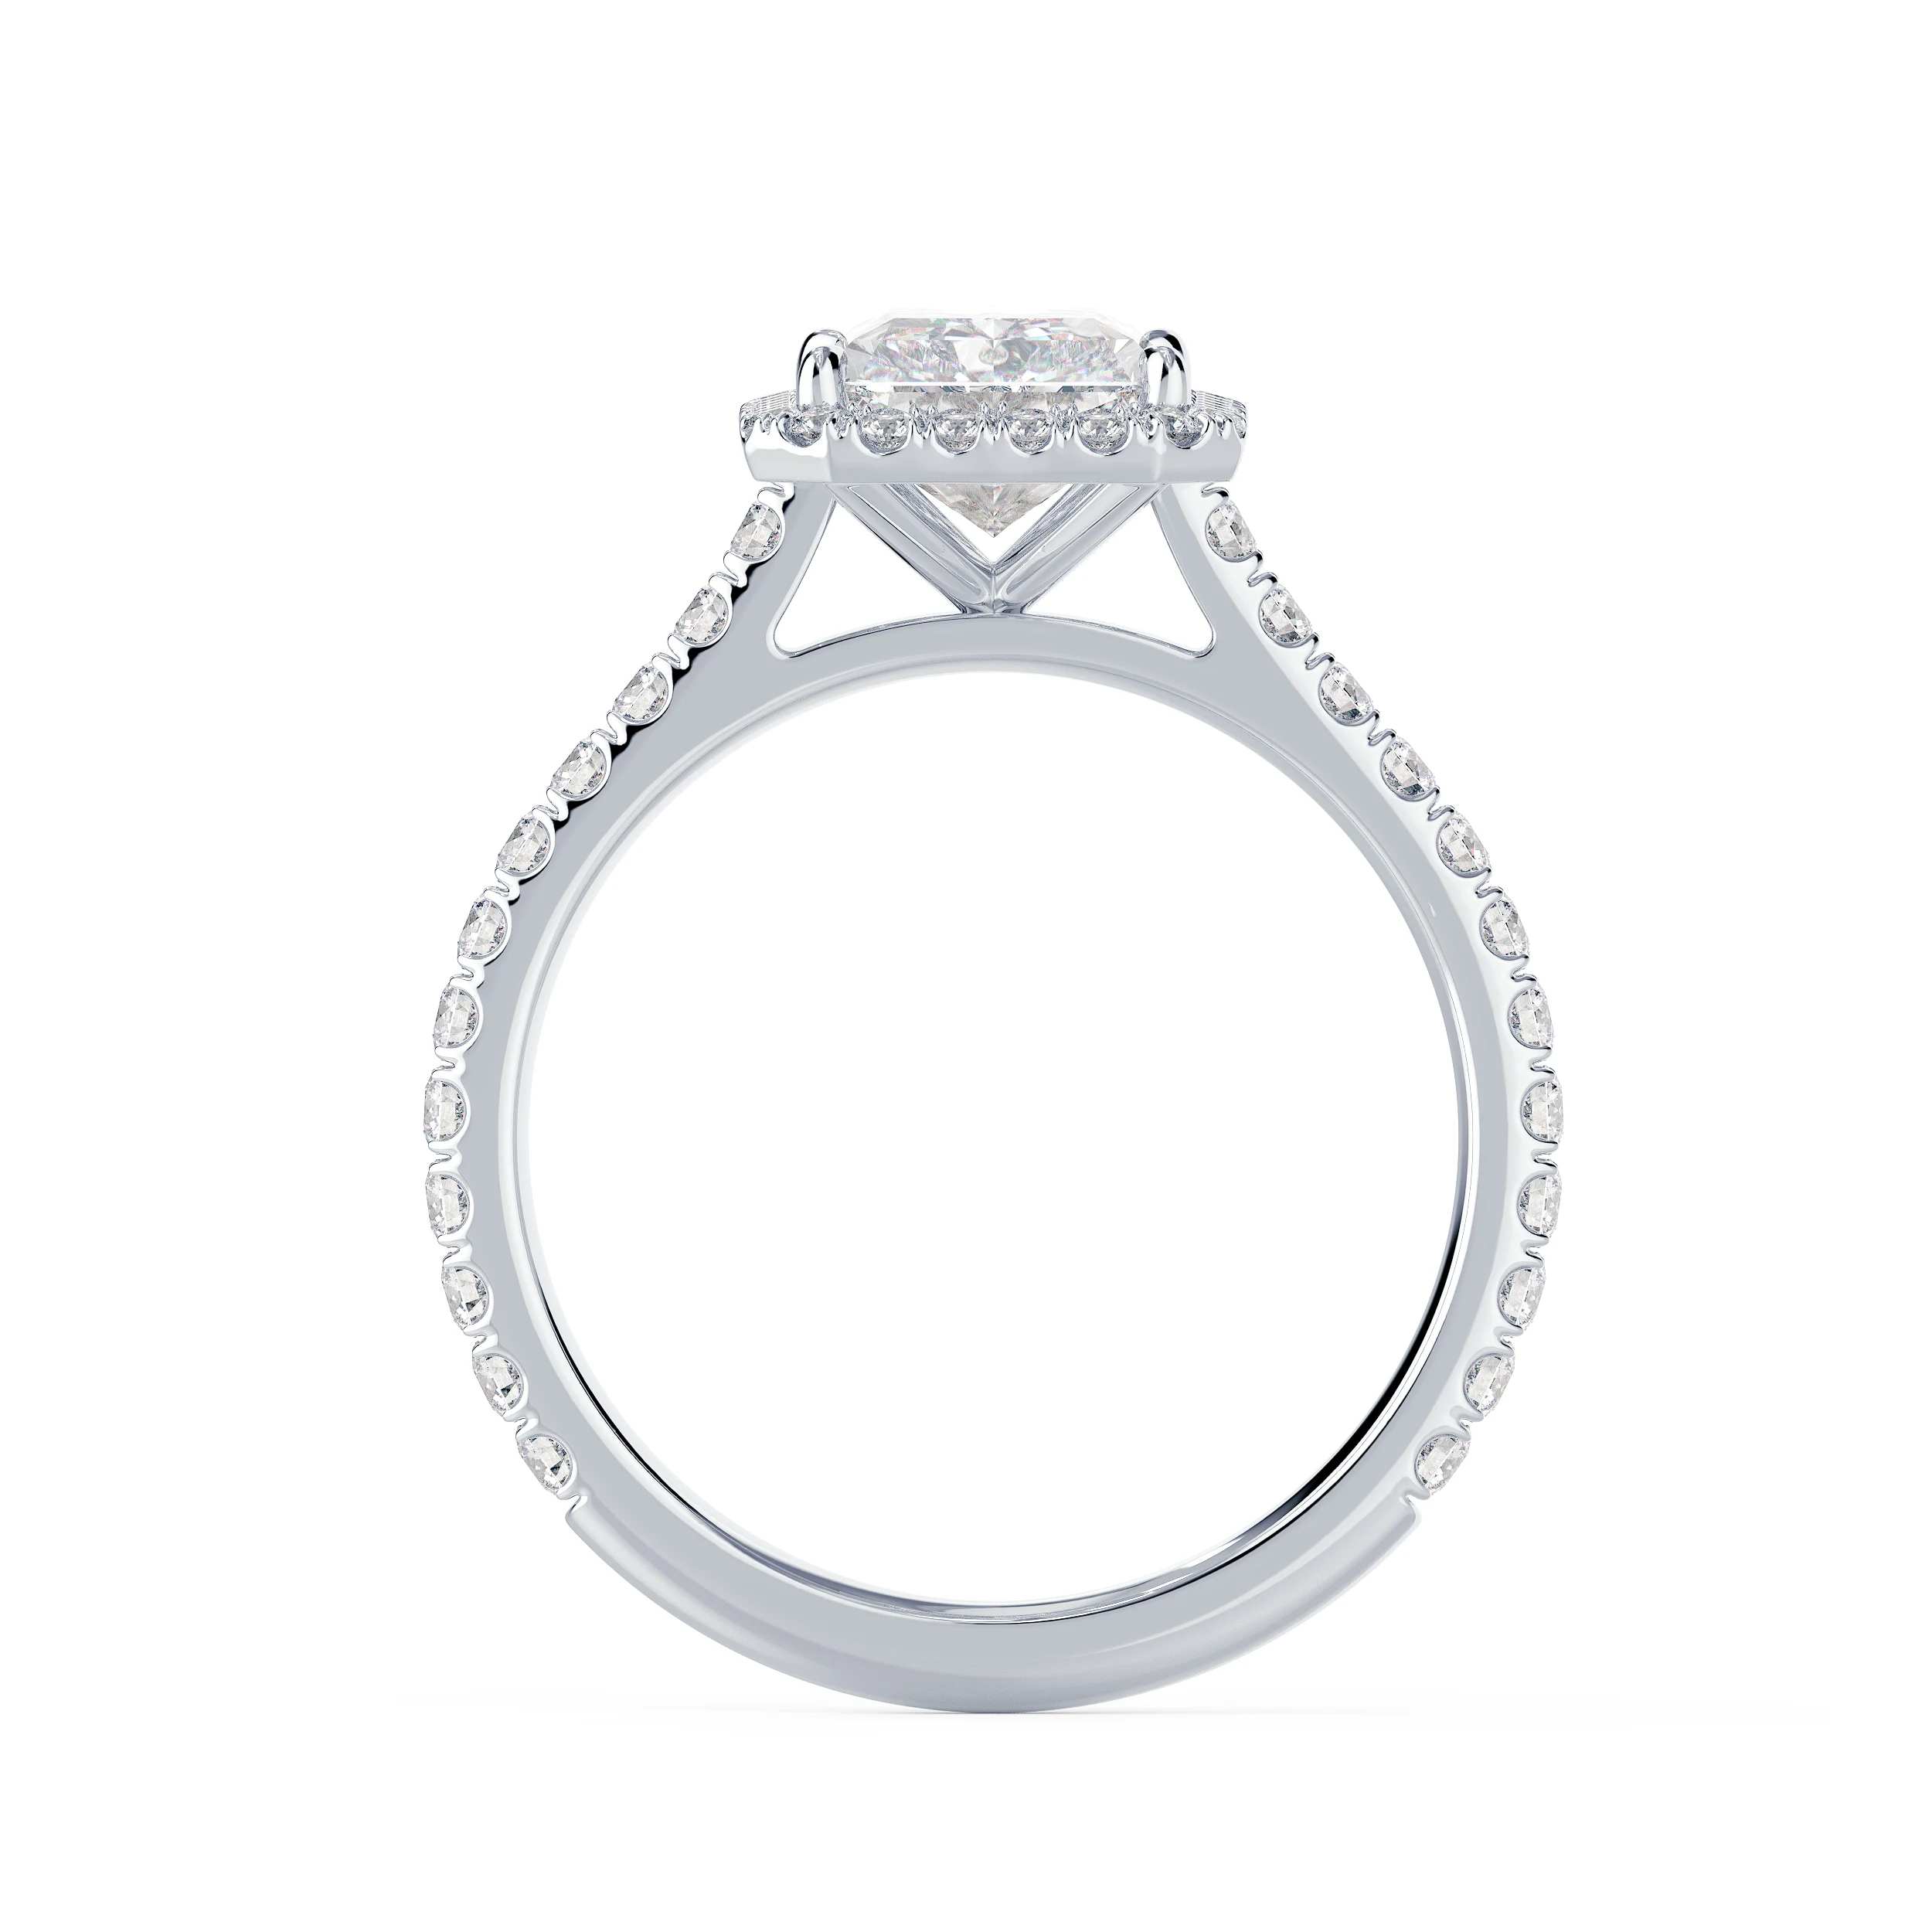 High Quality 2.0 Carat Man Made Diamonds set in 18k White Gold Radiant Halo Pavé Diamond Engagement Ring (Profile View)